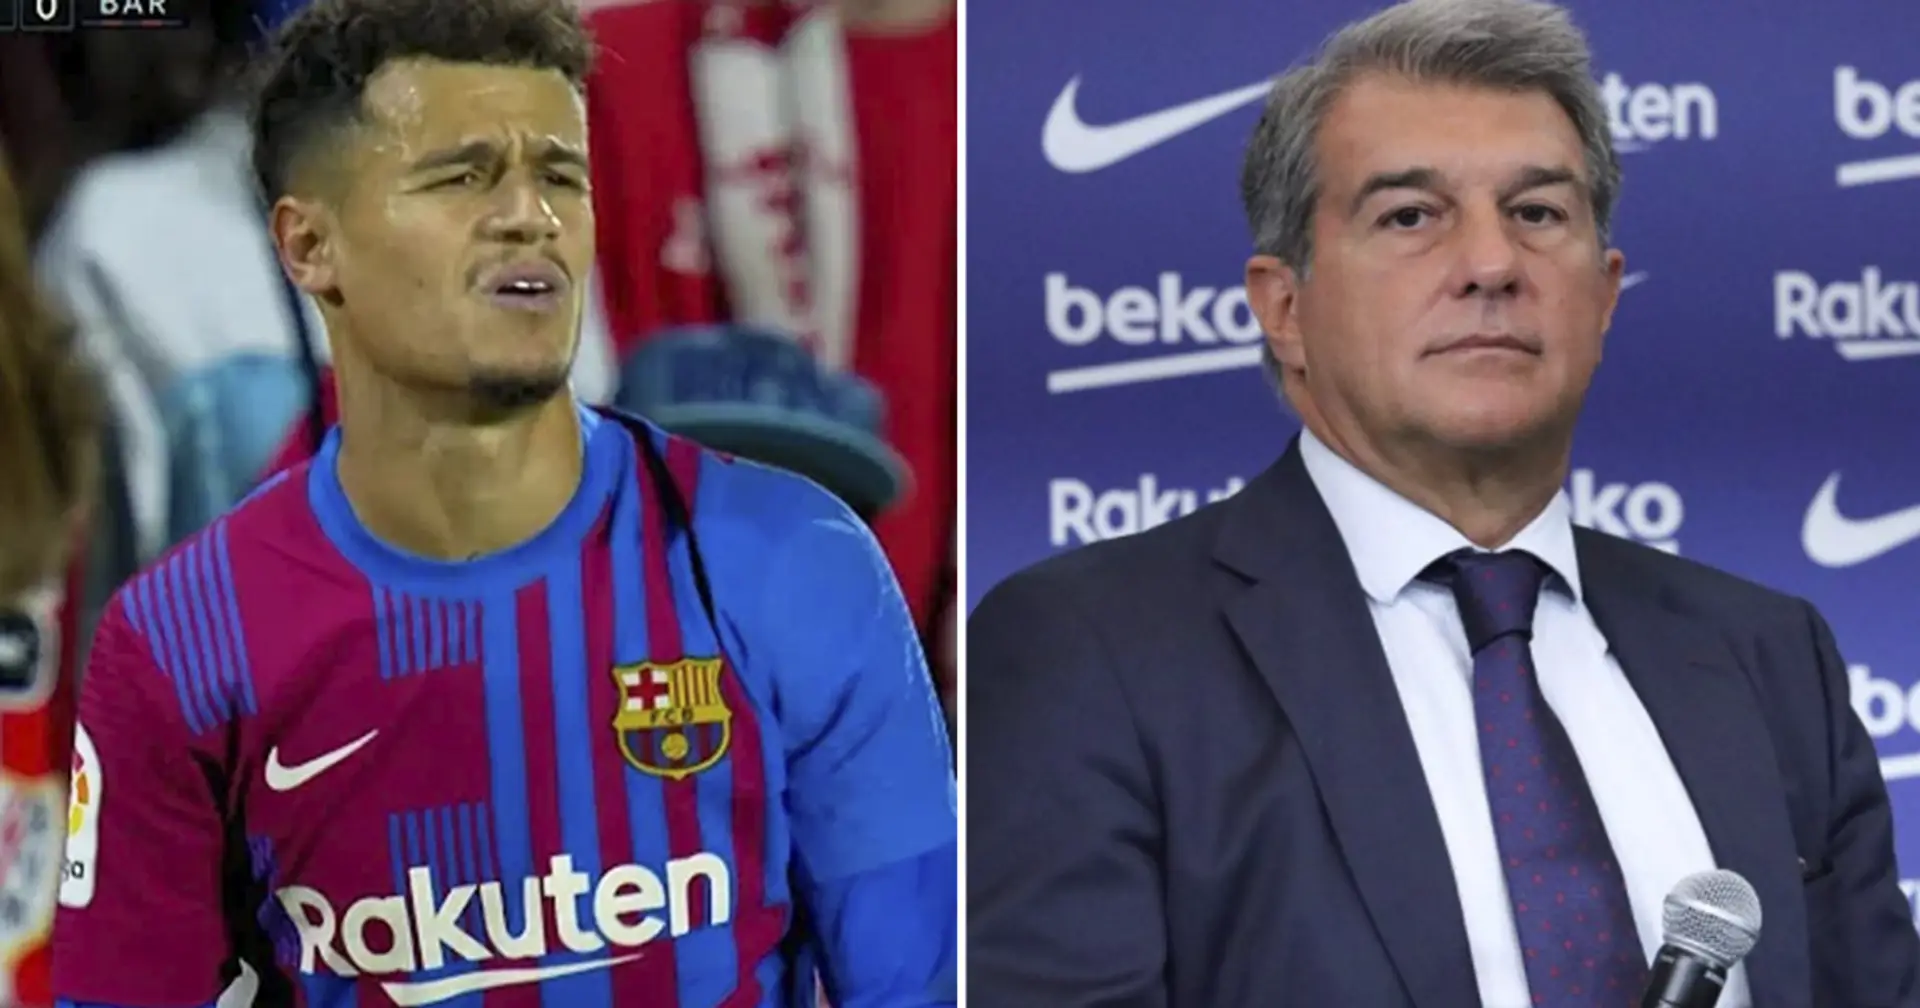 Barcelona looking to offload Coutinho in January, possible destination revealed (reliability: 4 stars)